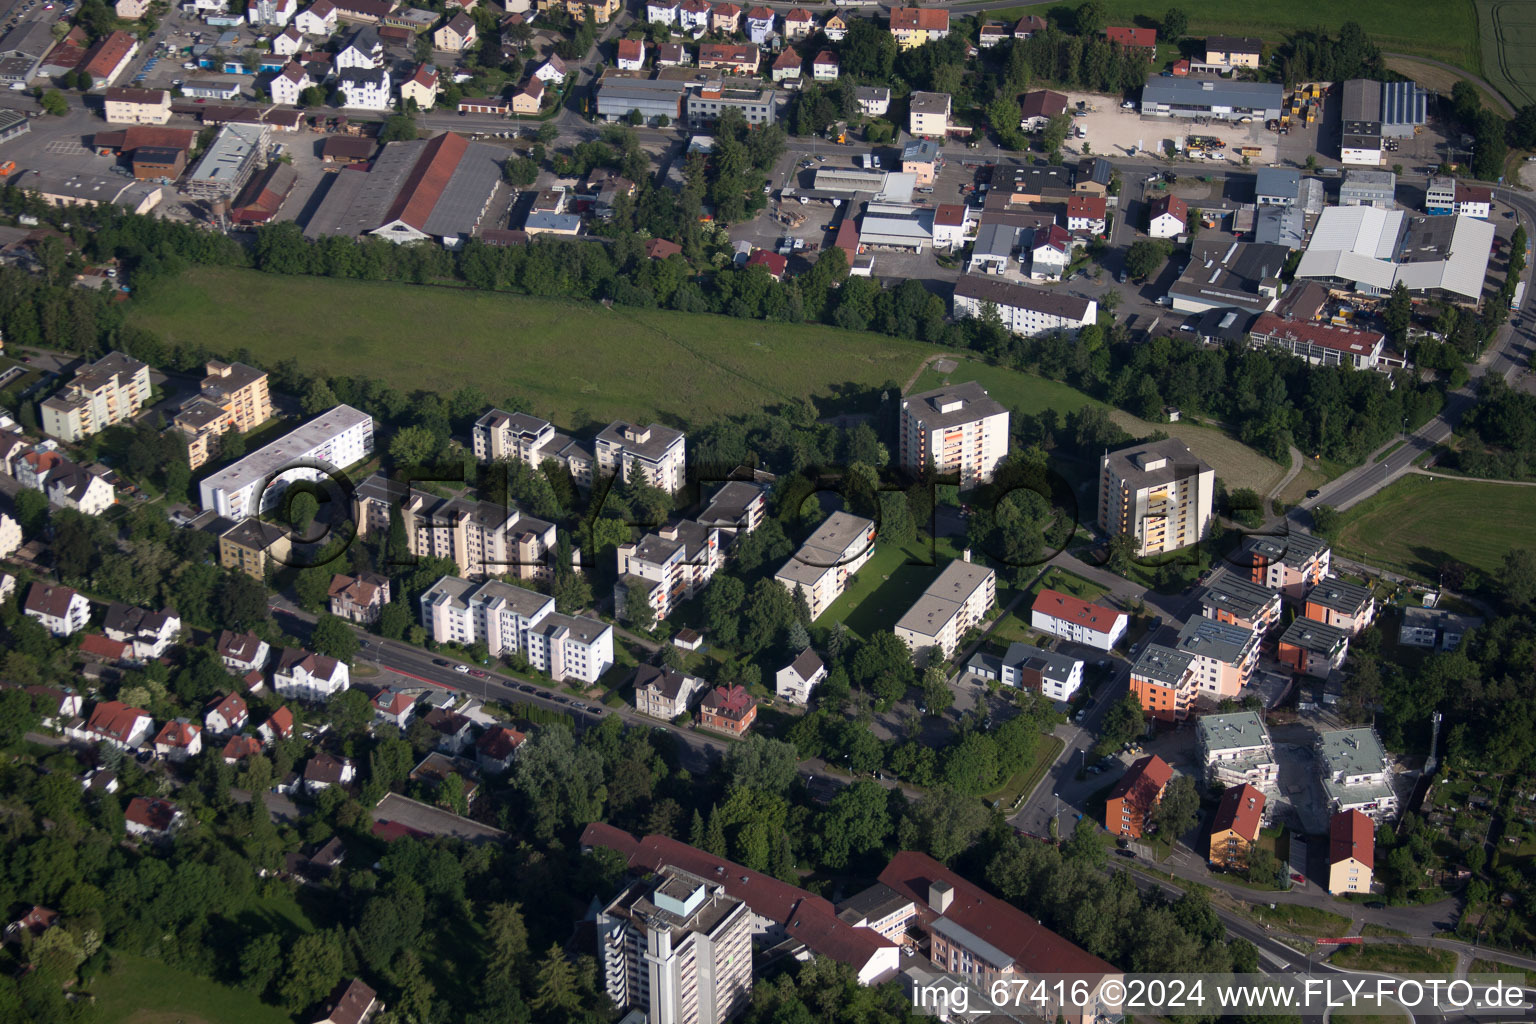 Town View of the streets and houses of the residential areas in Biberach an der Riss in the state Baden-Wurttemberg from above